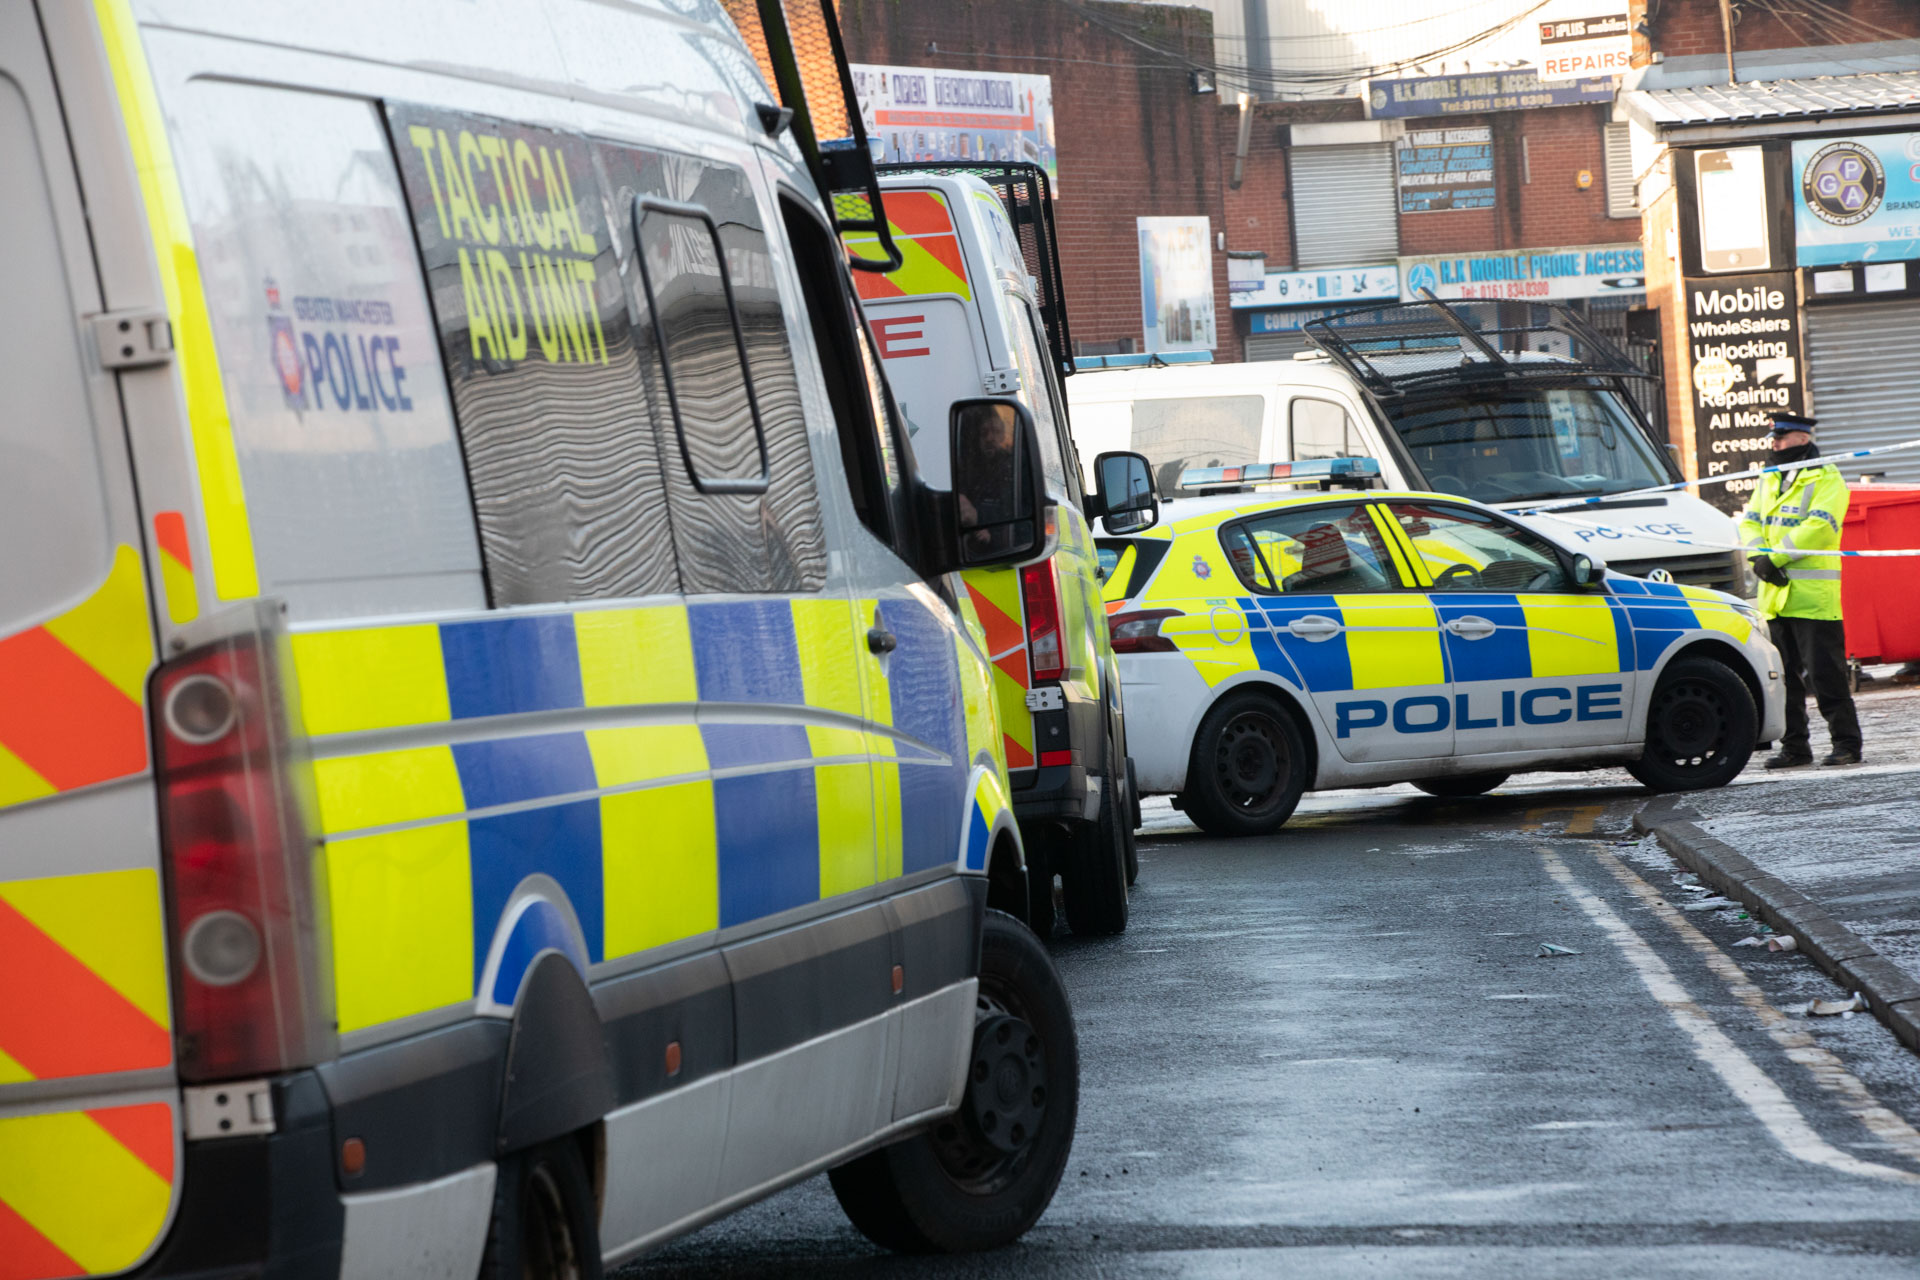 Image shows and Operation Vulcan raid with numerous police vans and police car in the shot.